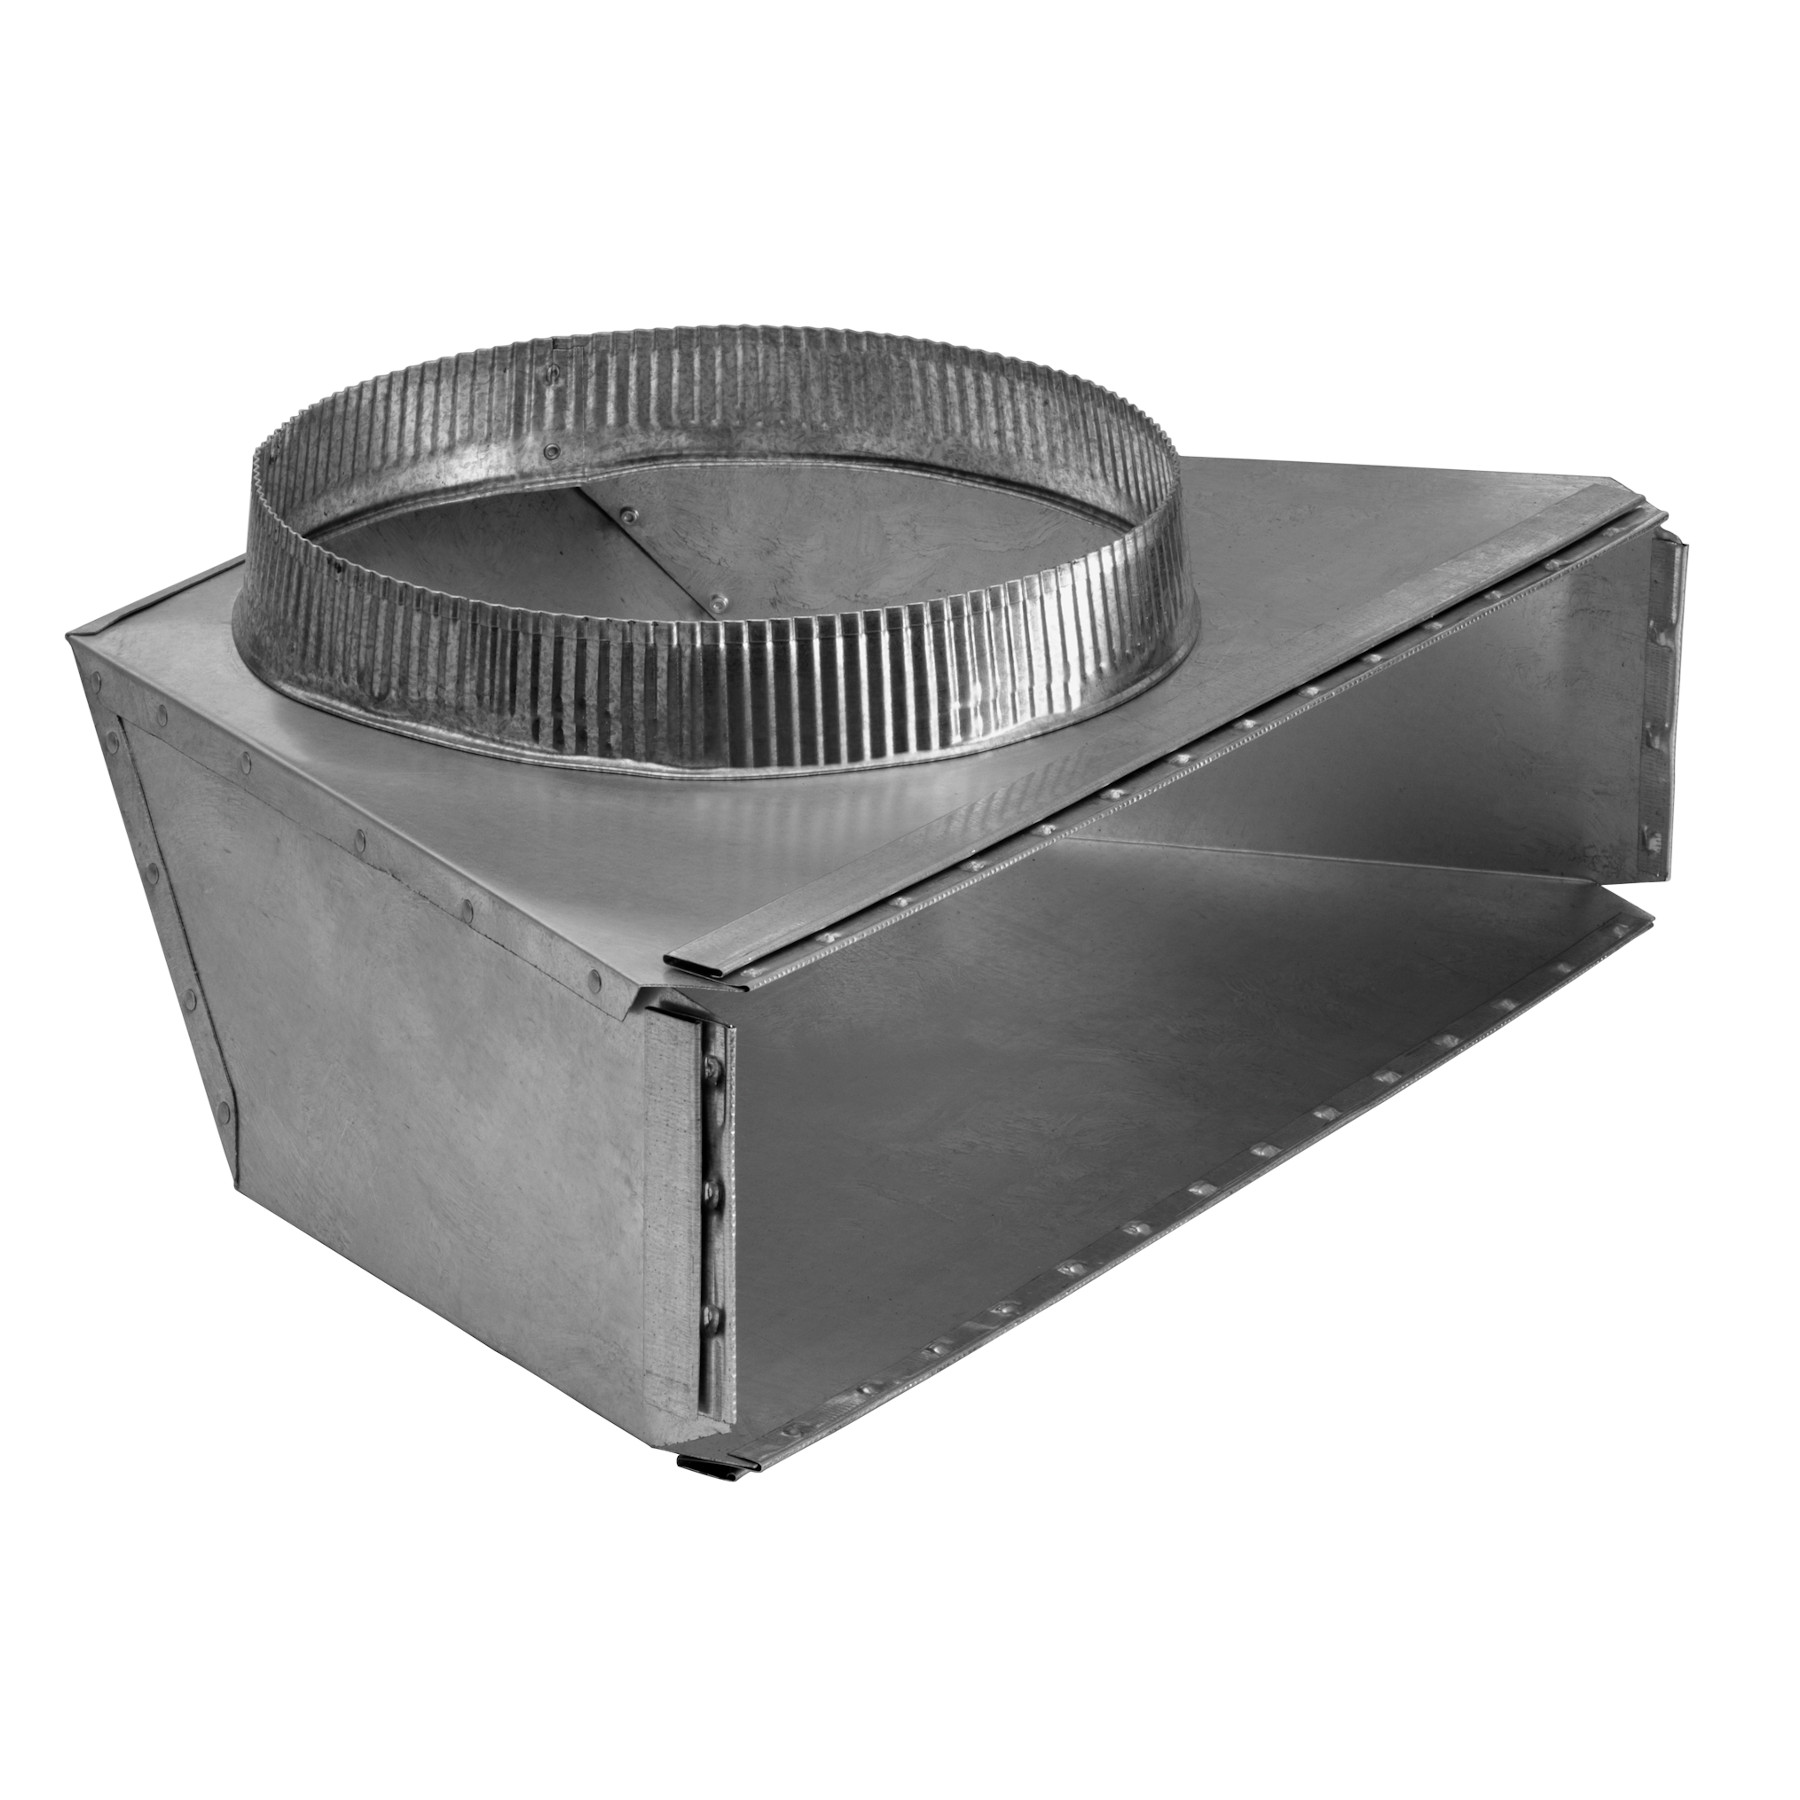 10-Inch Round Rear Transition for Range Hoods and Bath Ventilation Fans